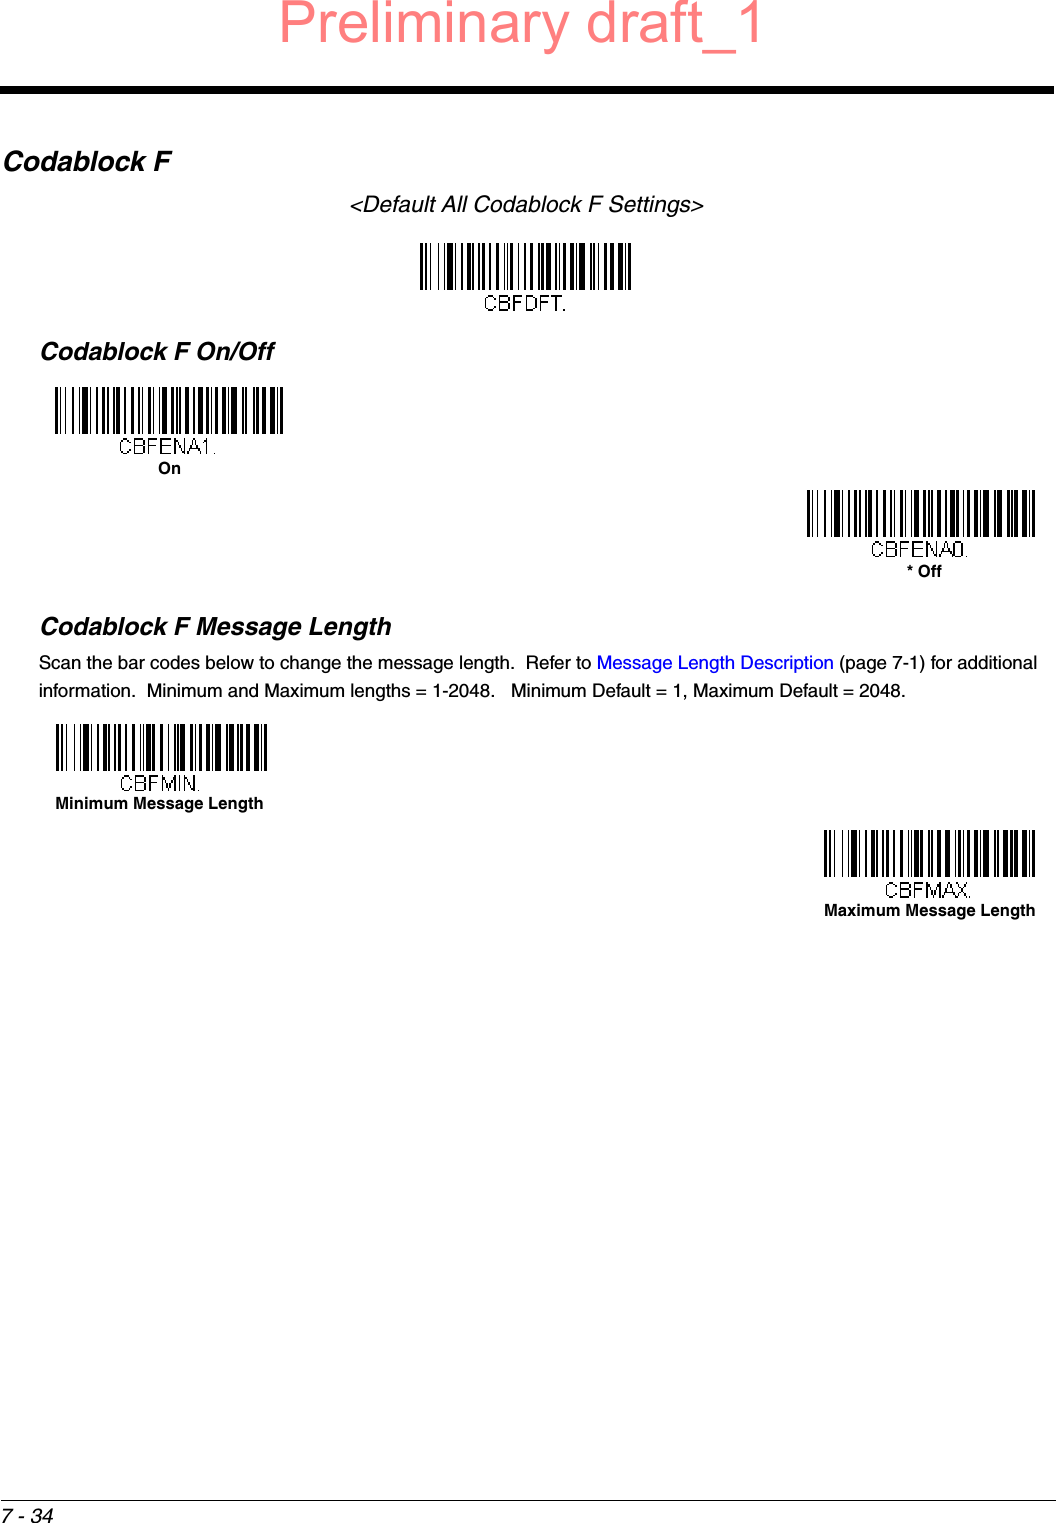 7 - 34Codablock F&lt;Default All Codablock F Settings&gt;Codablock F On/OffCodablock F Message LengthScan the bar codes below to change the message length.  Refer to Message Length Description (page 7-1) for additional information.  Minimum and Maximum lengths = 1-2048.   Minimum Default = 1, Maximum Default = 2048.On* OffMinimum Message LengthMaximum Message LengthPreliminary draft_1